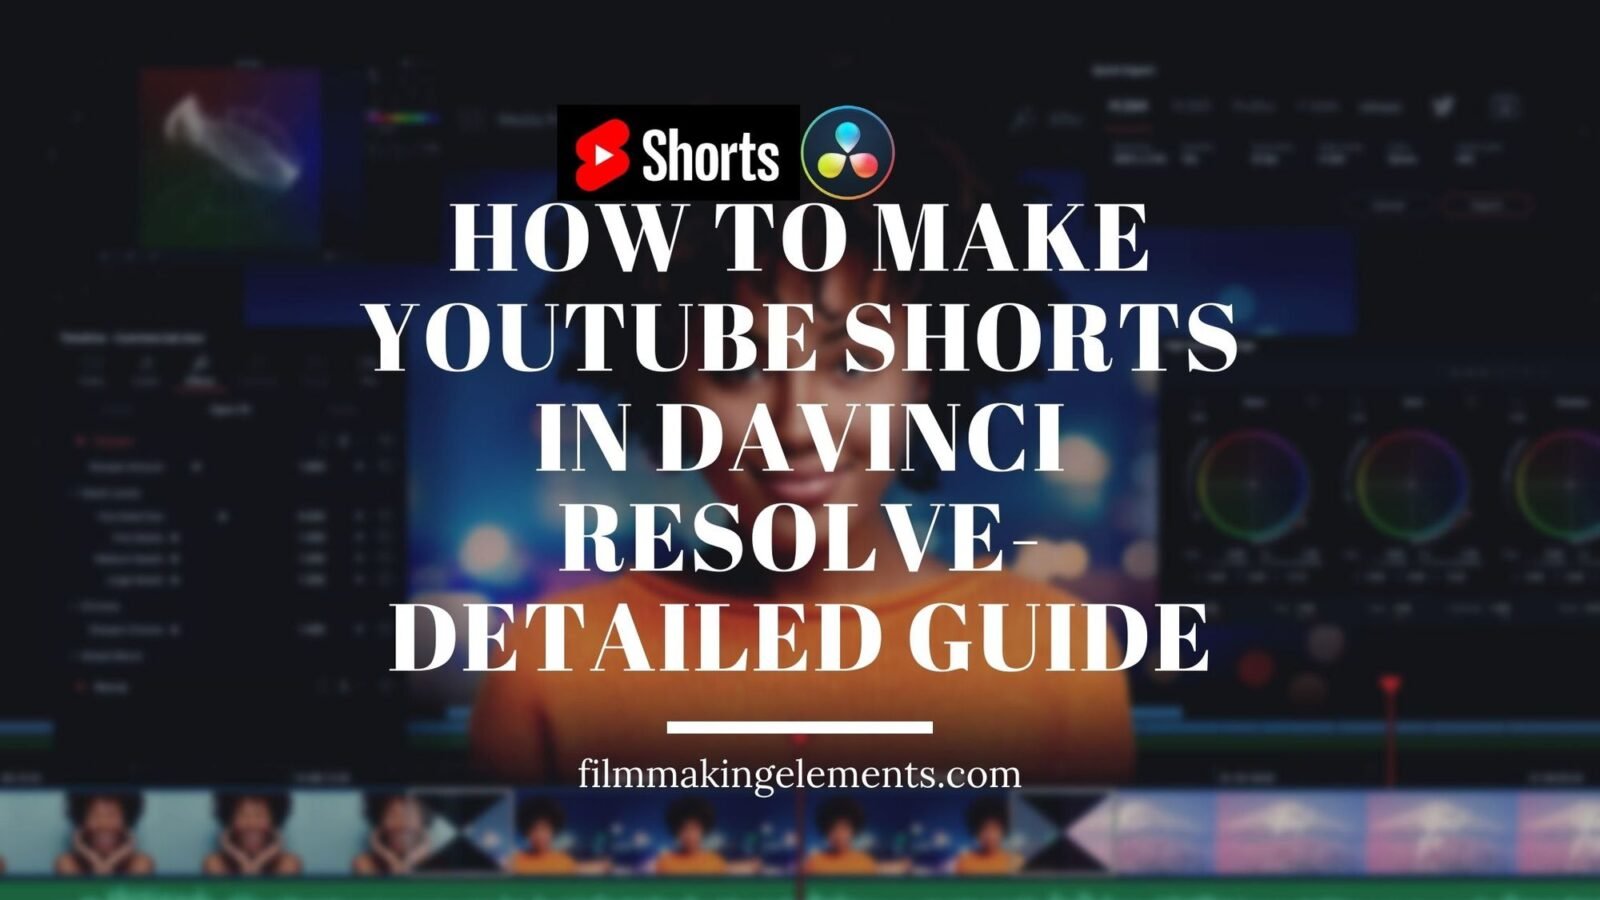 How To Make Youtube Shorts In Davinci Resolve- Detailed Guide